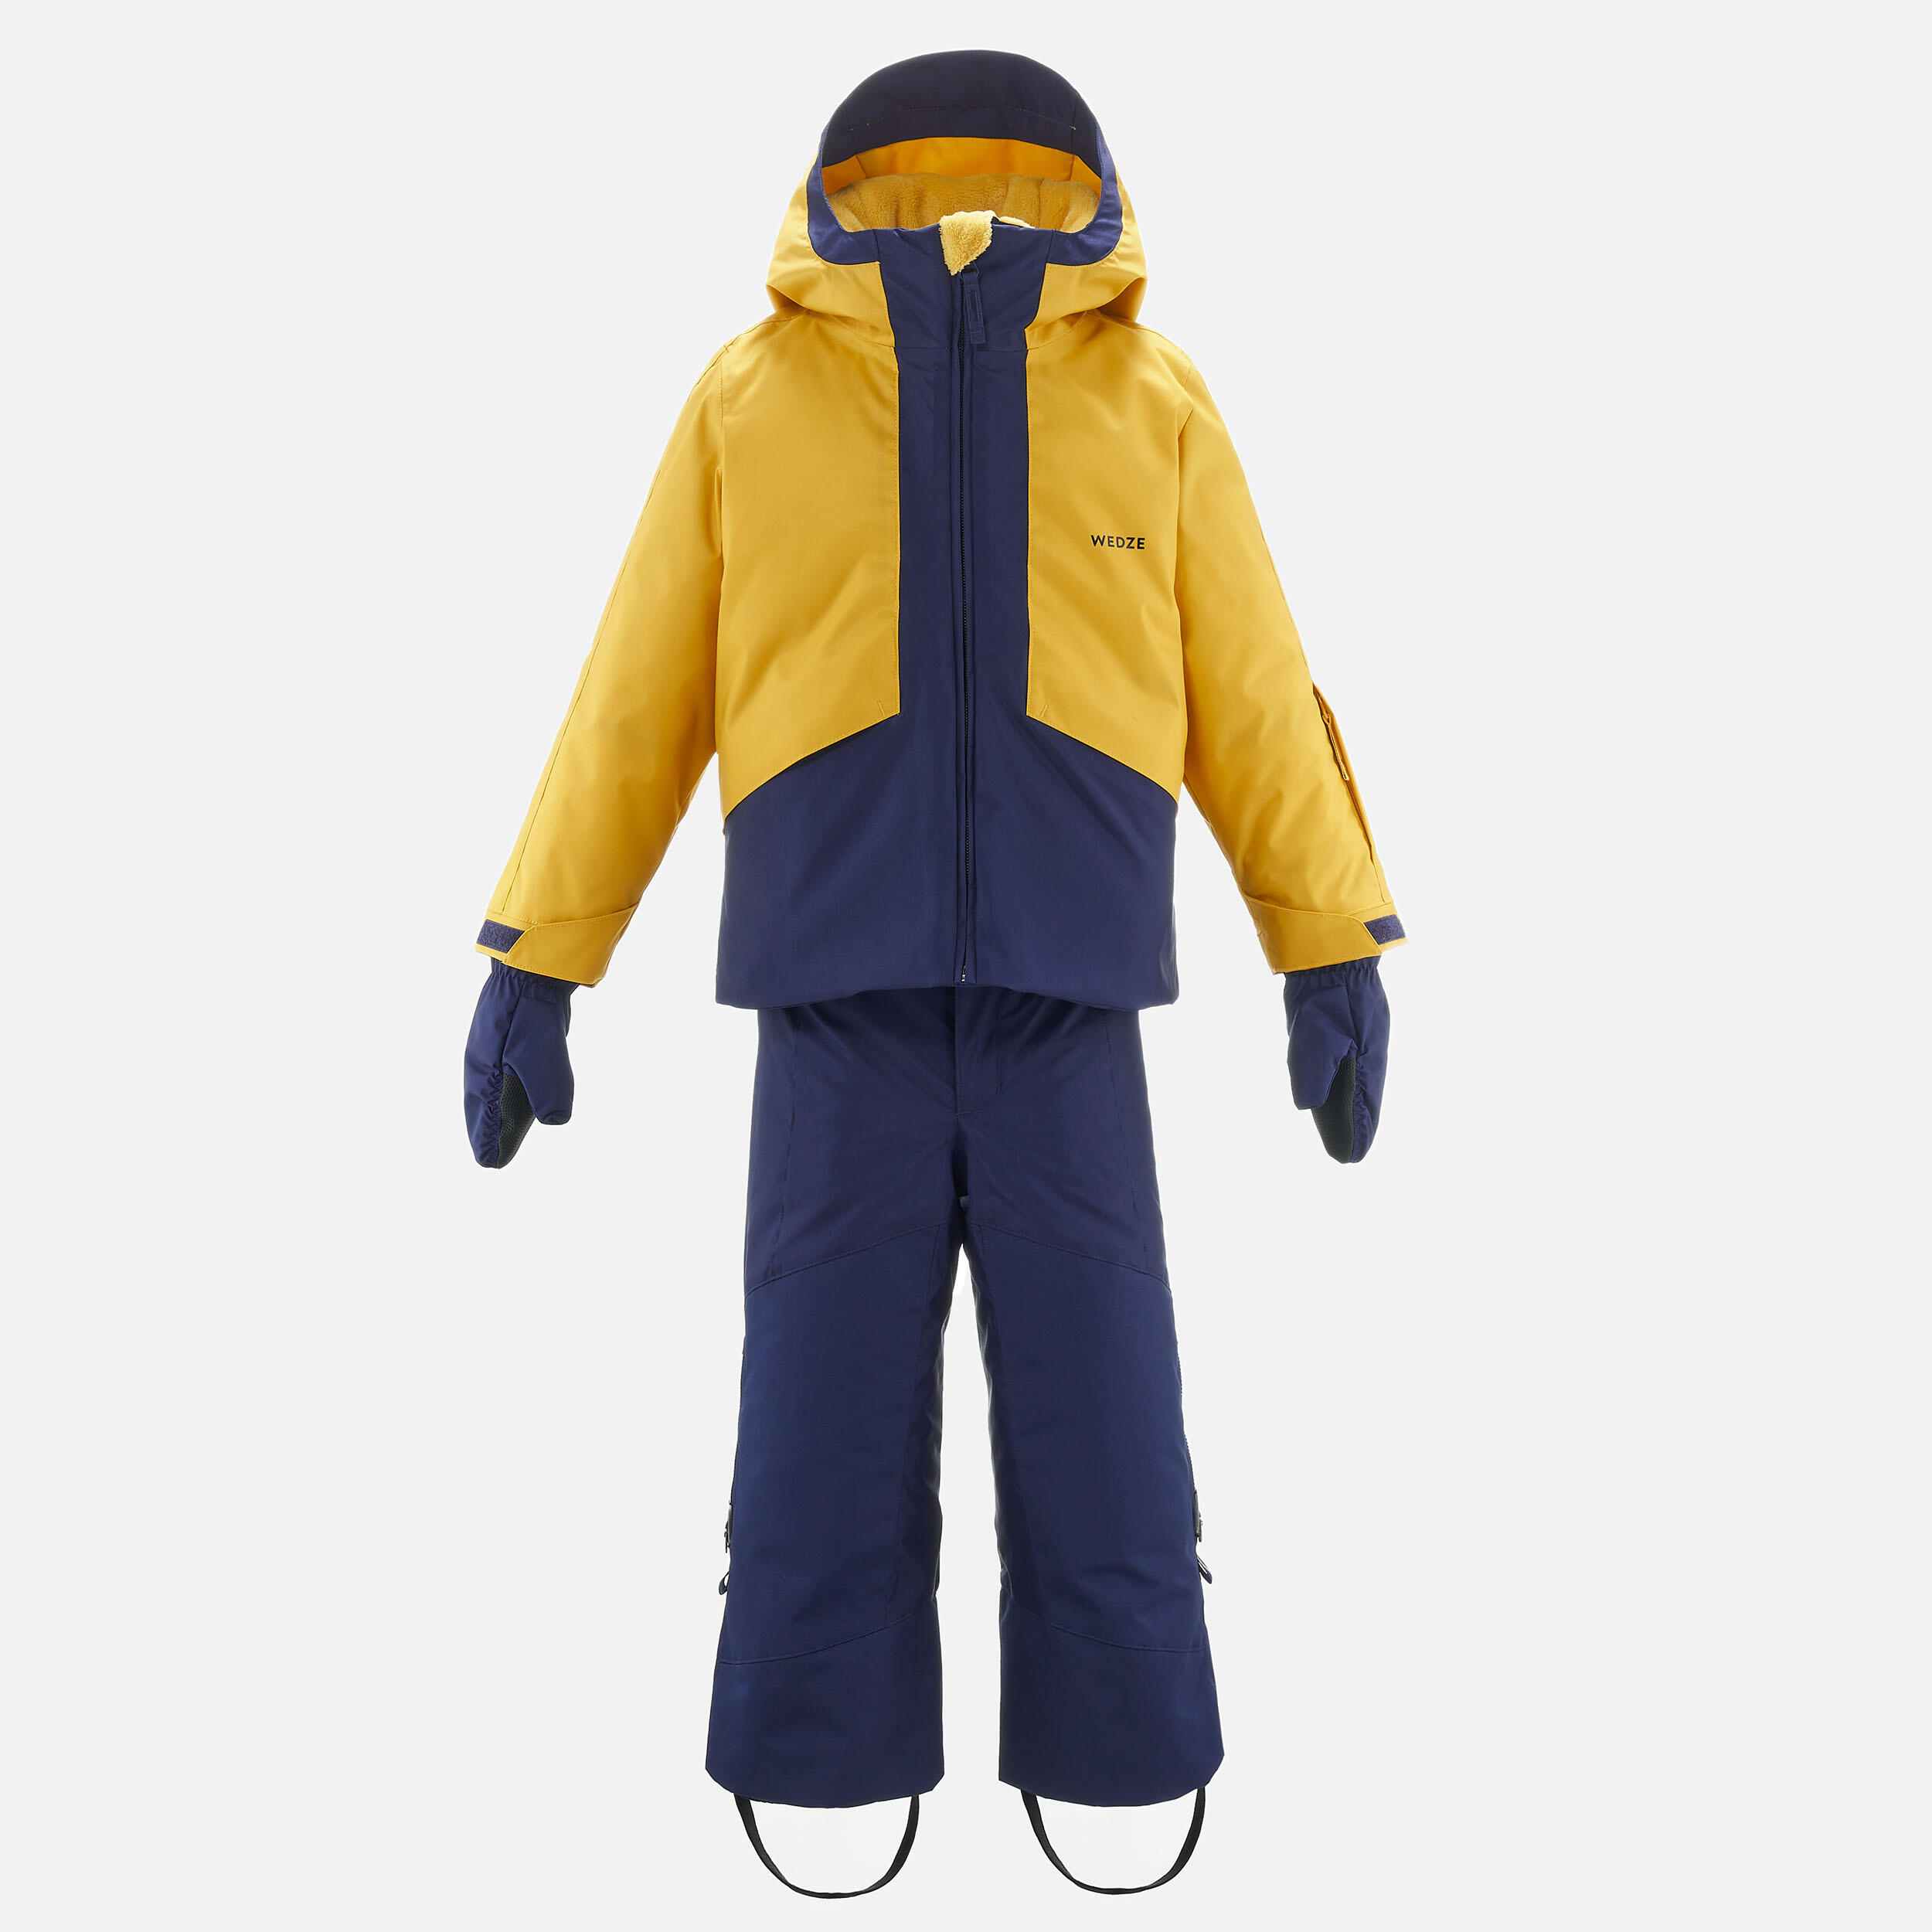 Kids’ Warm and Waterproof Ski Suit 580 - Yellow and Blue 4/15